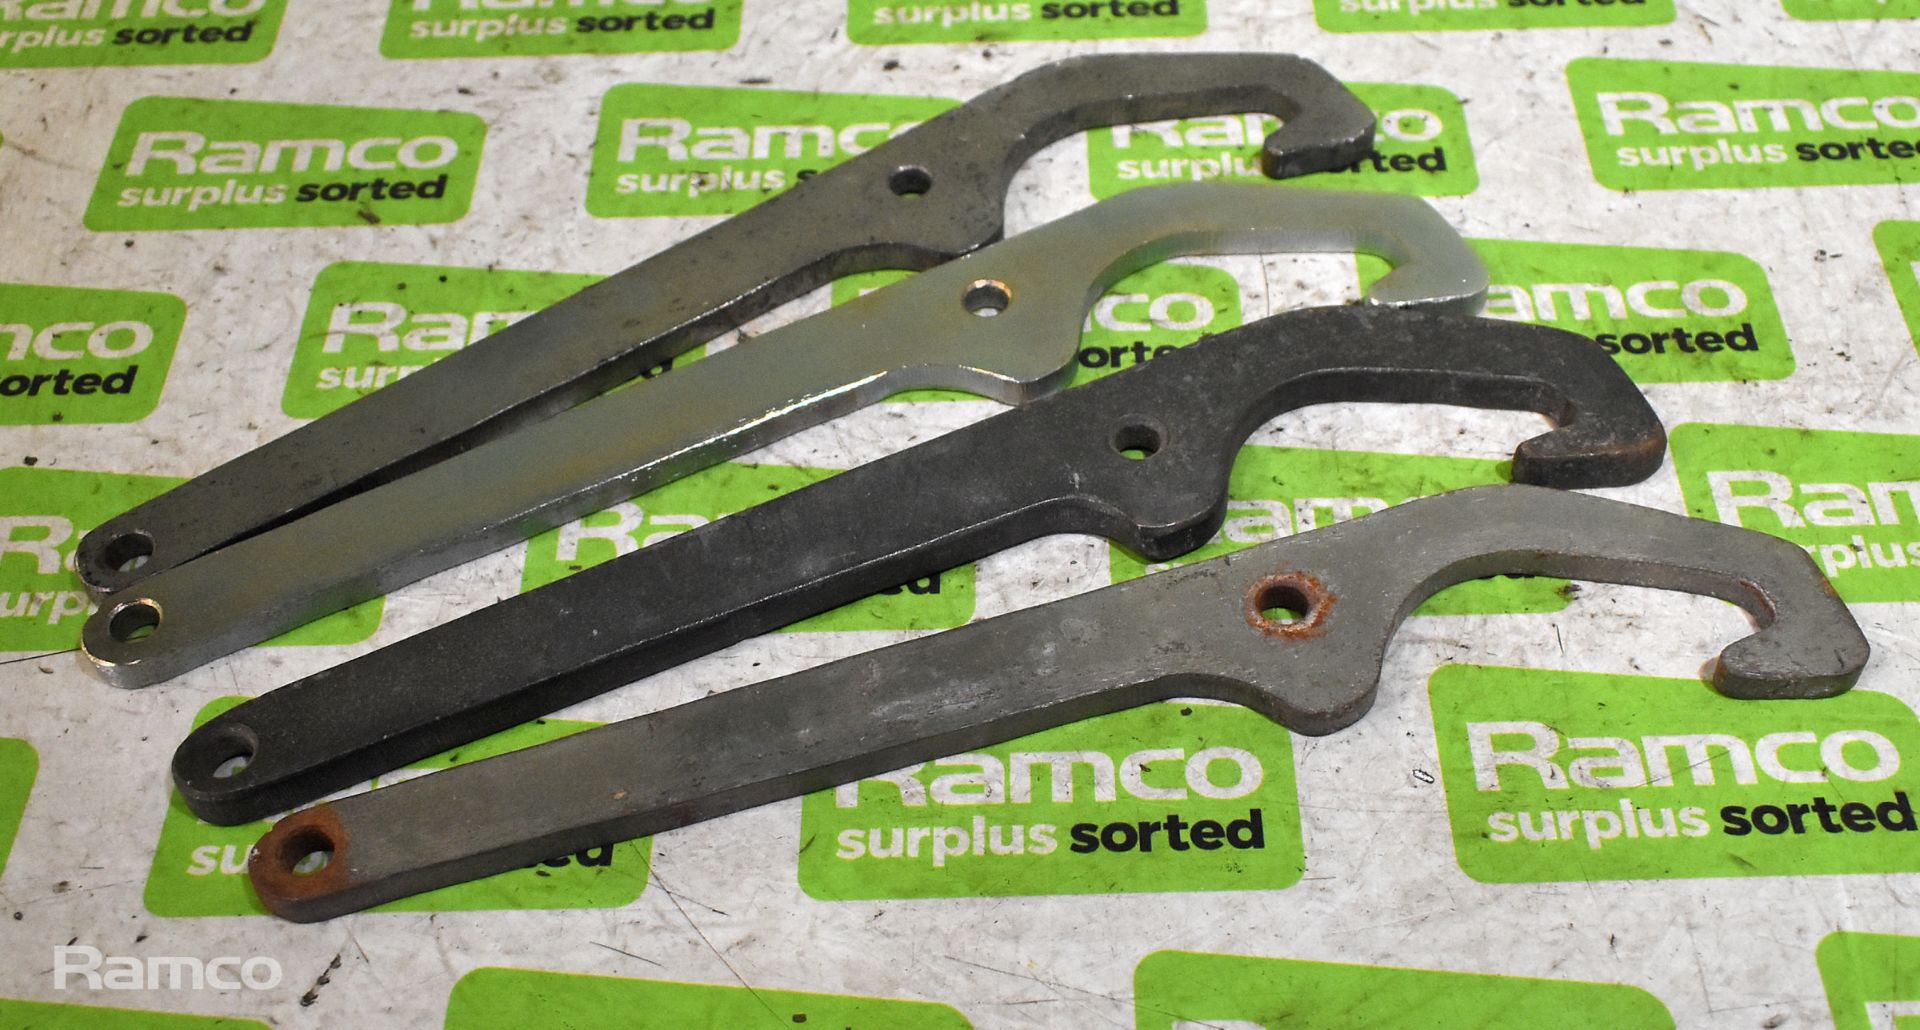 4x C - type spanner tools, Hand tools - blind rivet, pipe cutters, allen key set, cold chisels - Image 9 of 10